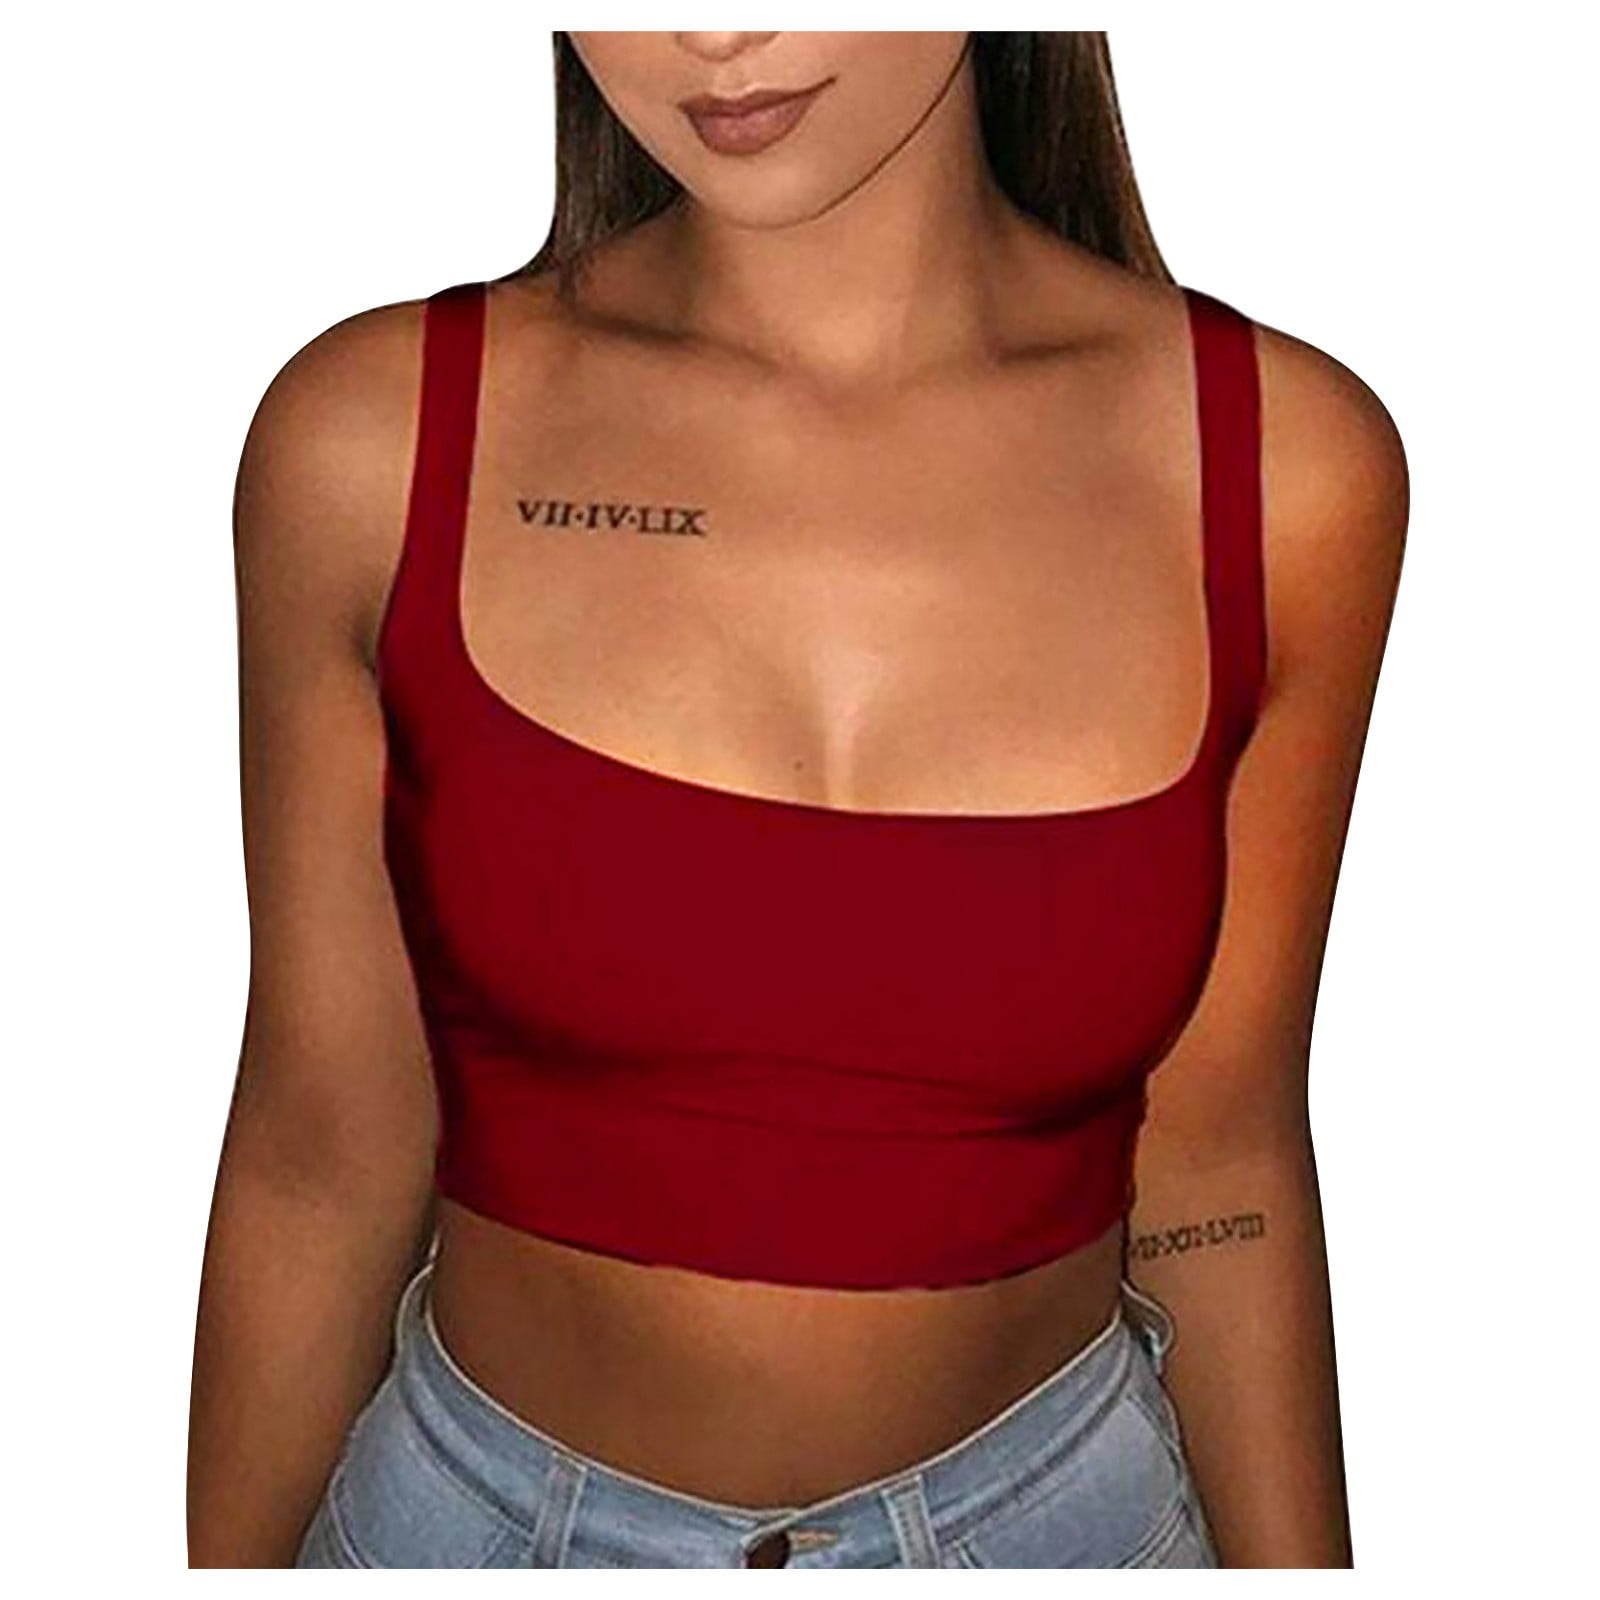 MRULIC tank top for women Women's Sleeveless Strappy Tank O Neck Double  Layer Workout Fitness Casual Crop Tops Womens tank tops Blue + L 